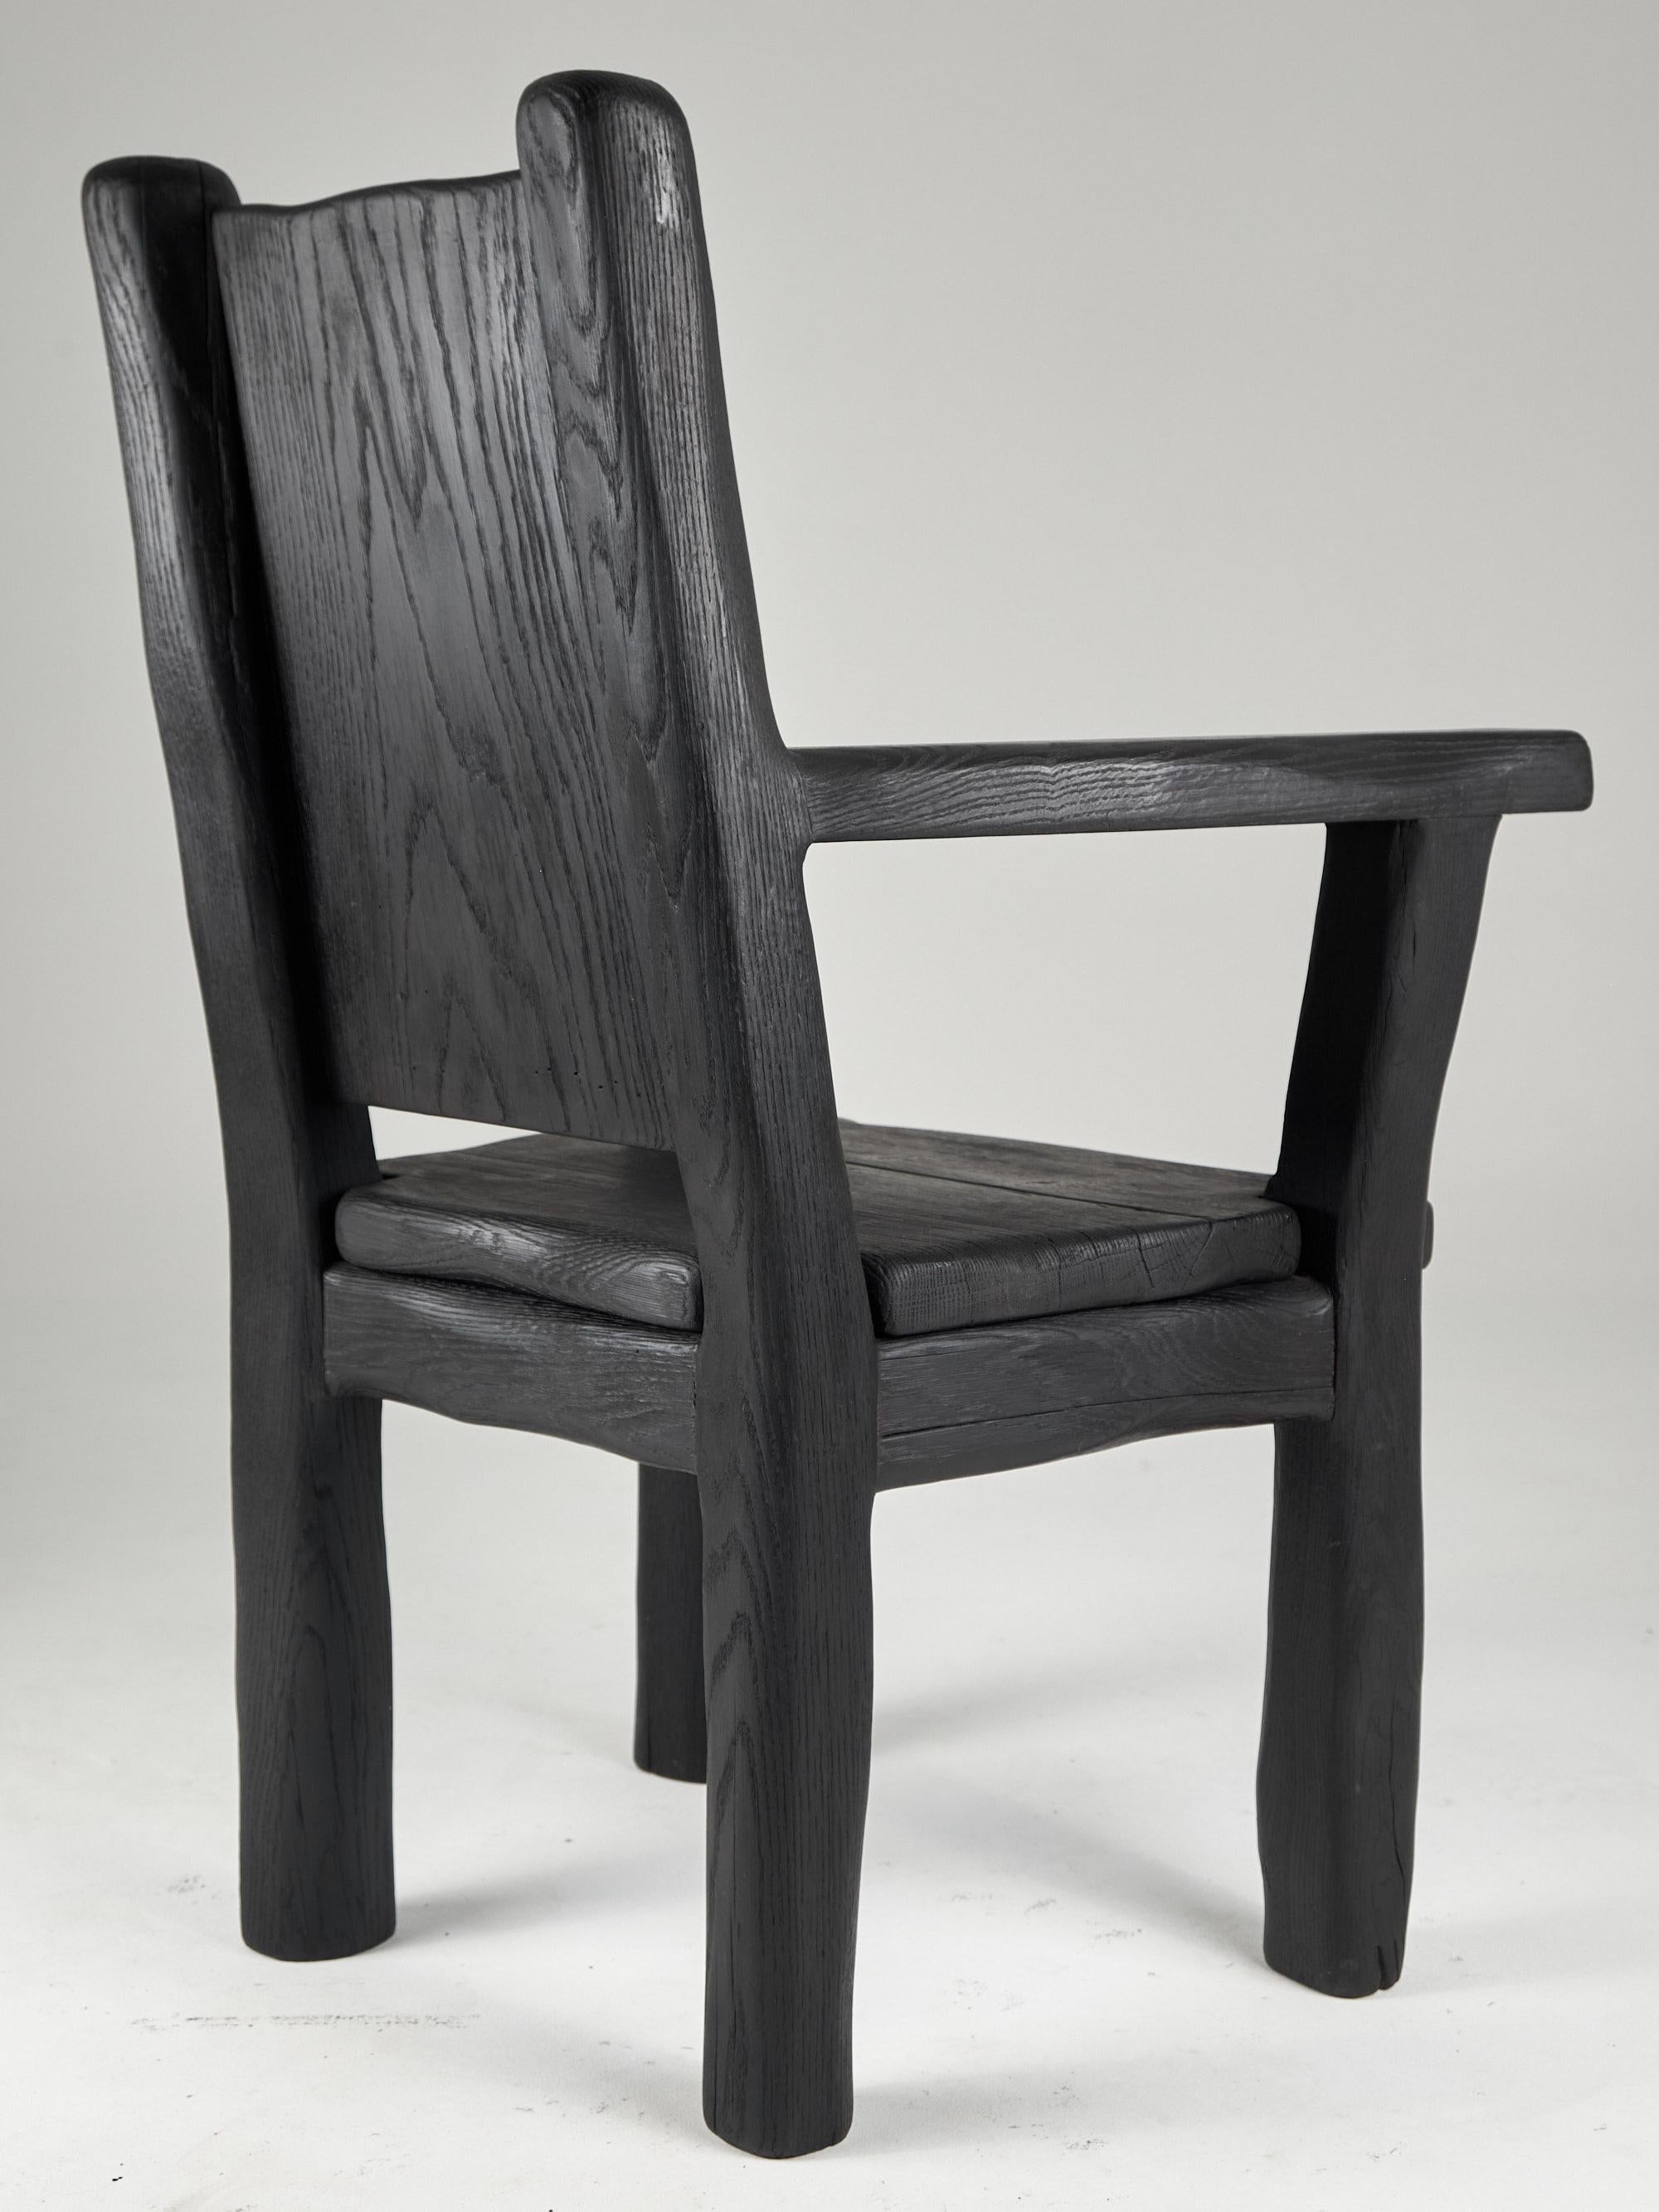 Massive Oak Armchair, Rustic, Burnt Black, For Generations to Last For Sale 3